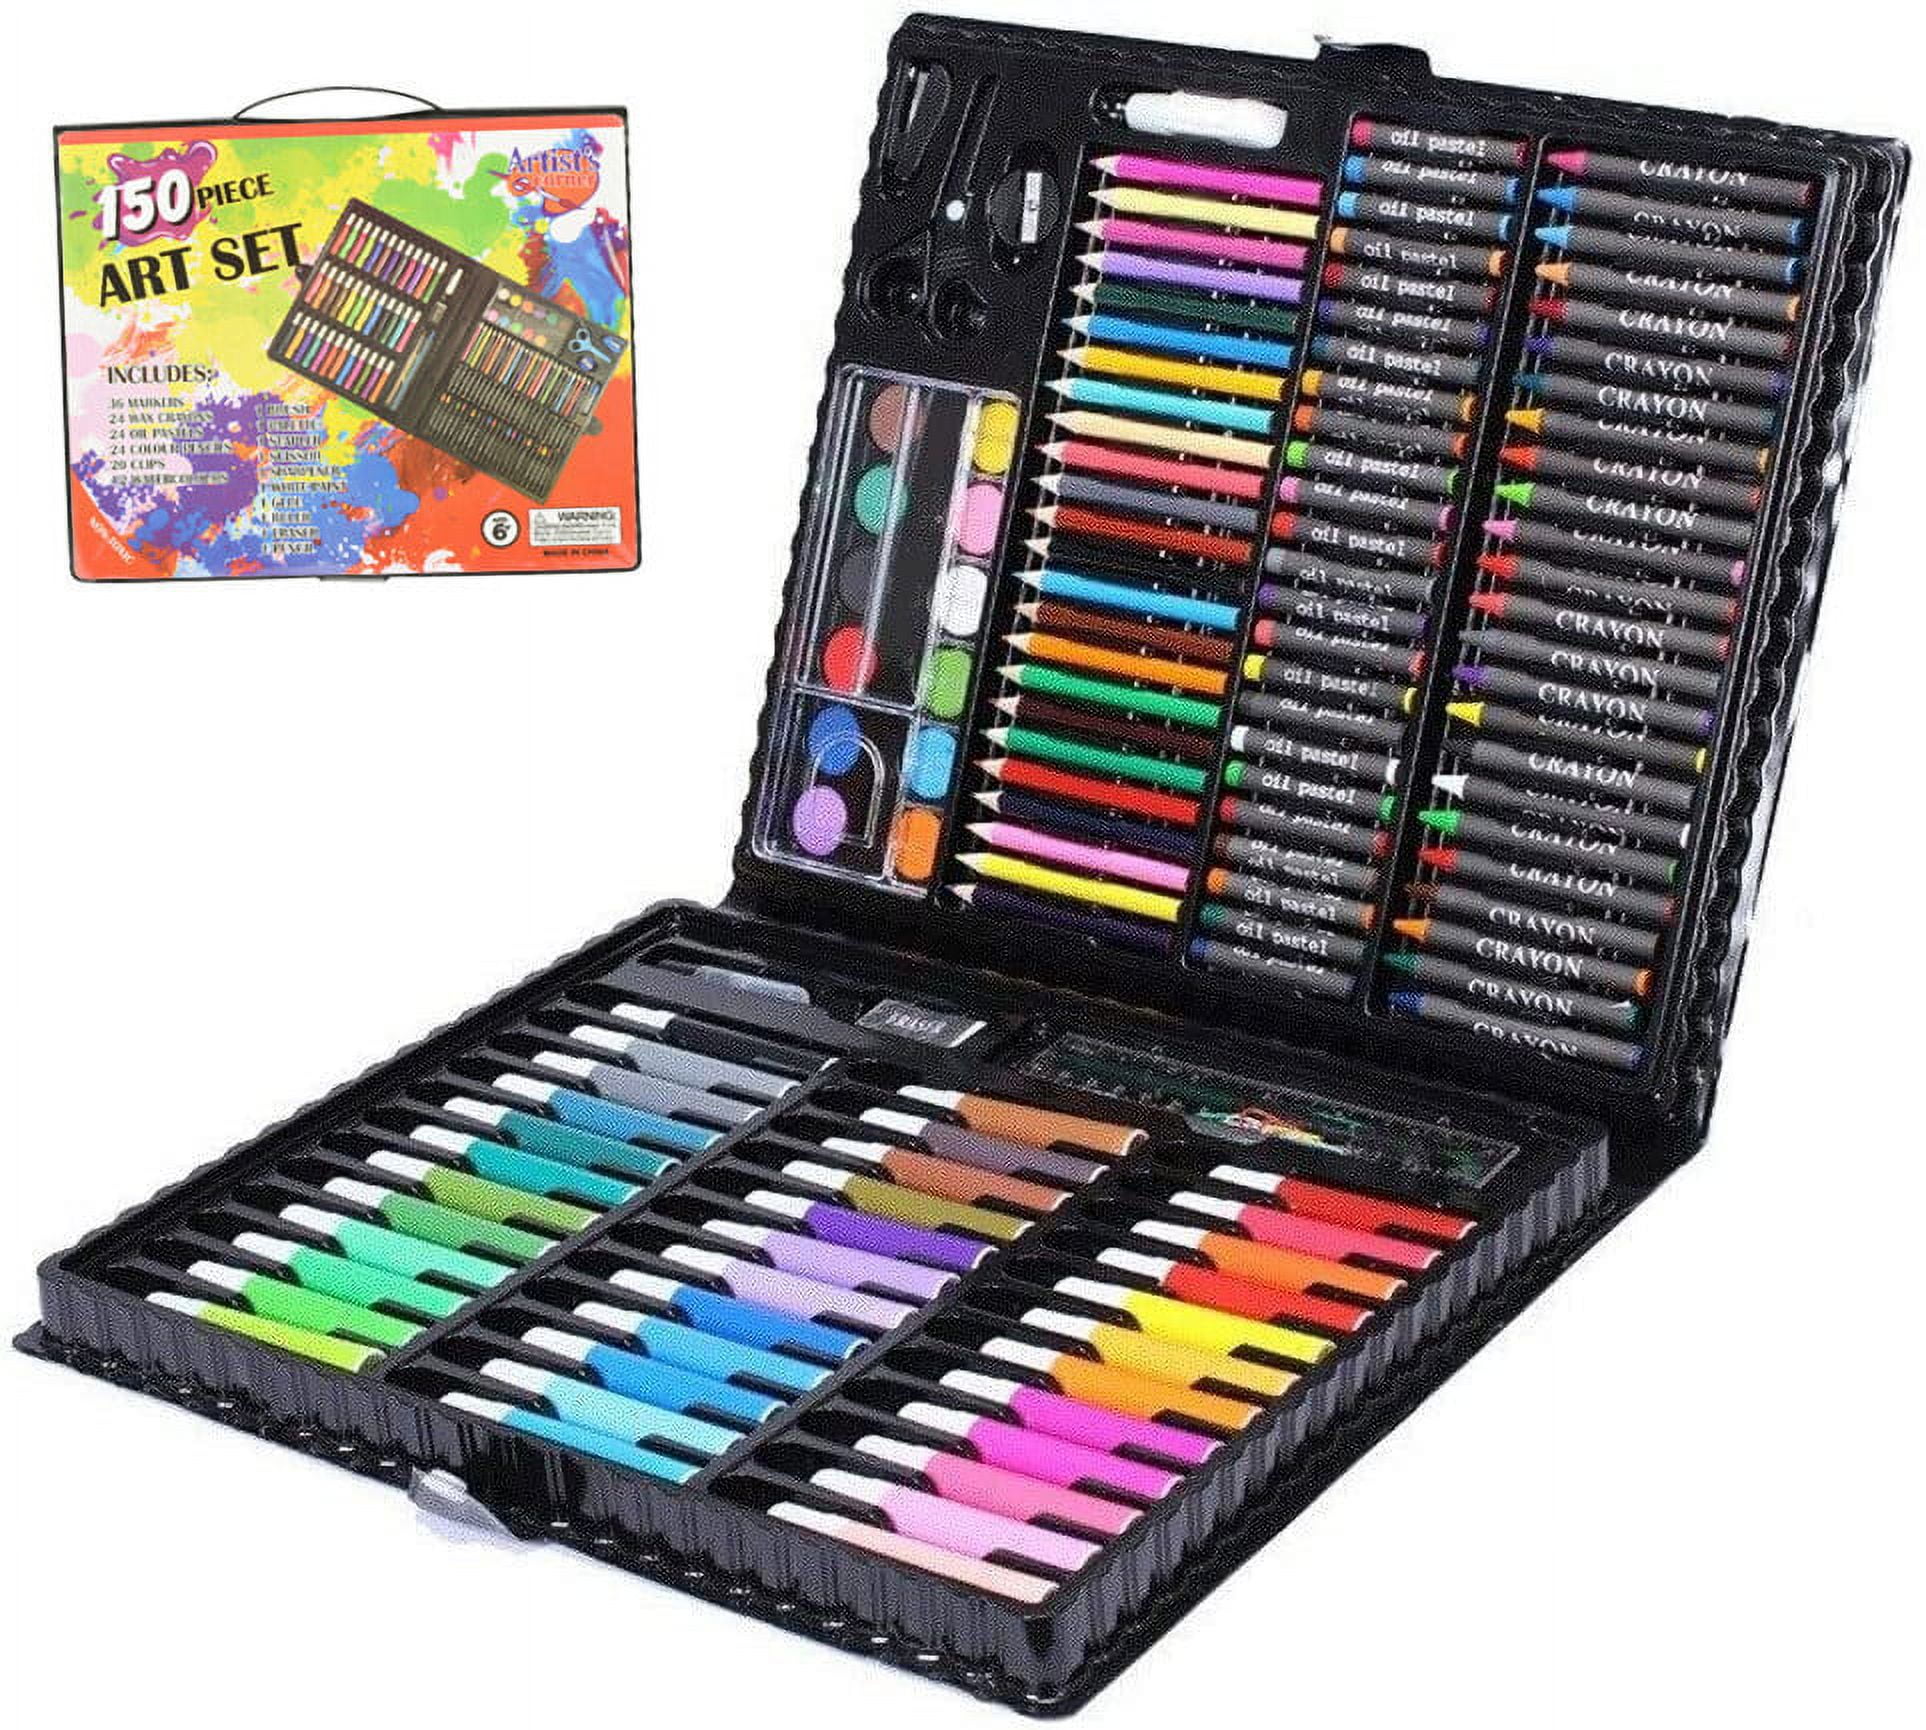  KIDDYCOLOR 150-Pieces Deluxe Art Set for Kids, Drawing Art  Supplies in a Plastic Case, Great Gift for Kids Christmas New Year : Arts,  Crafts & Sewing